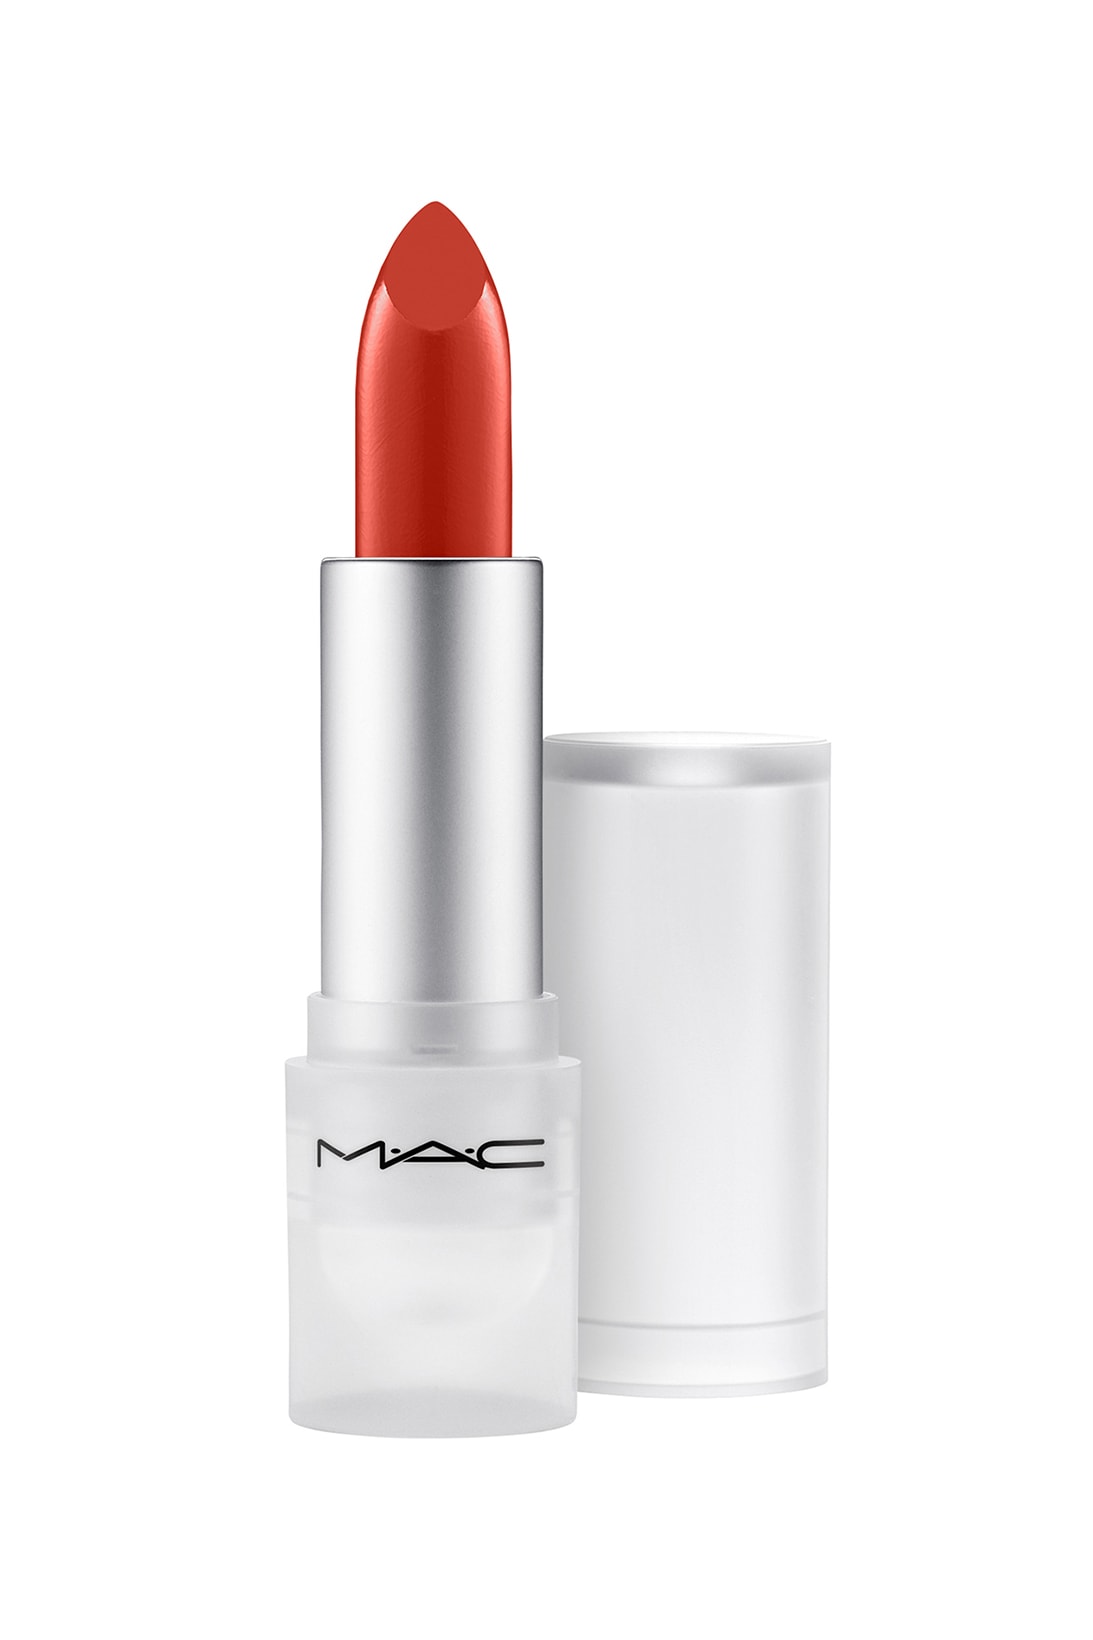 mac cosmetics loud and clear collection lipsticks lip gloss eyeshadows highlighters makeup beauty